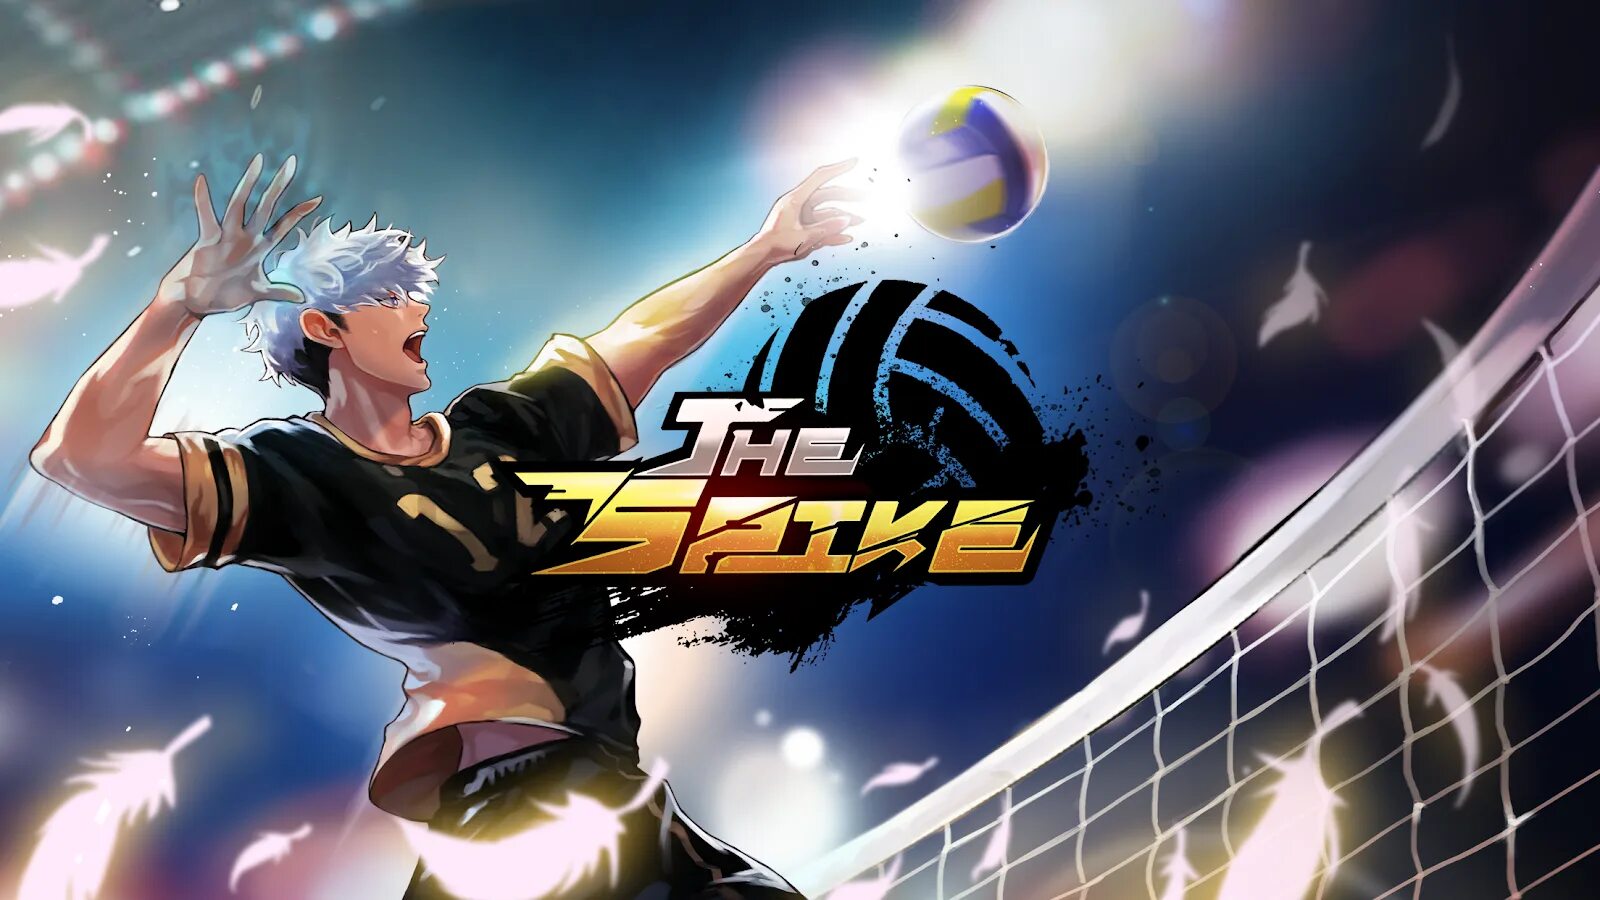 The Spike Volleyball игра. Spike в волейболе. The Spike Volleyball story. Nishikawa волейбол the Spike. The spike volleyball story мод